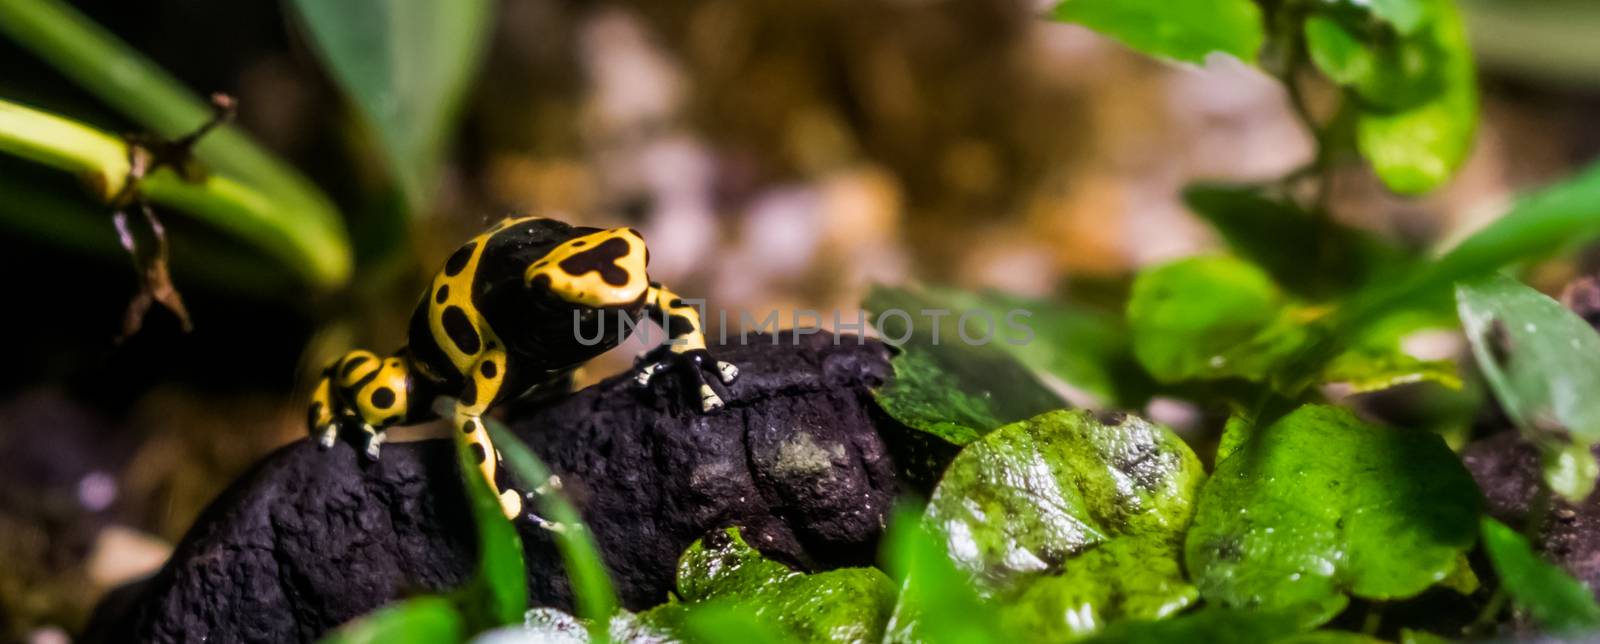 yellow banded poison dart frog in closeup, tropical and toxic pet from the rainforest of America by charlottebleijenberg